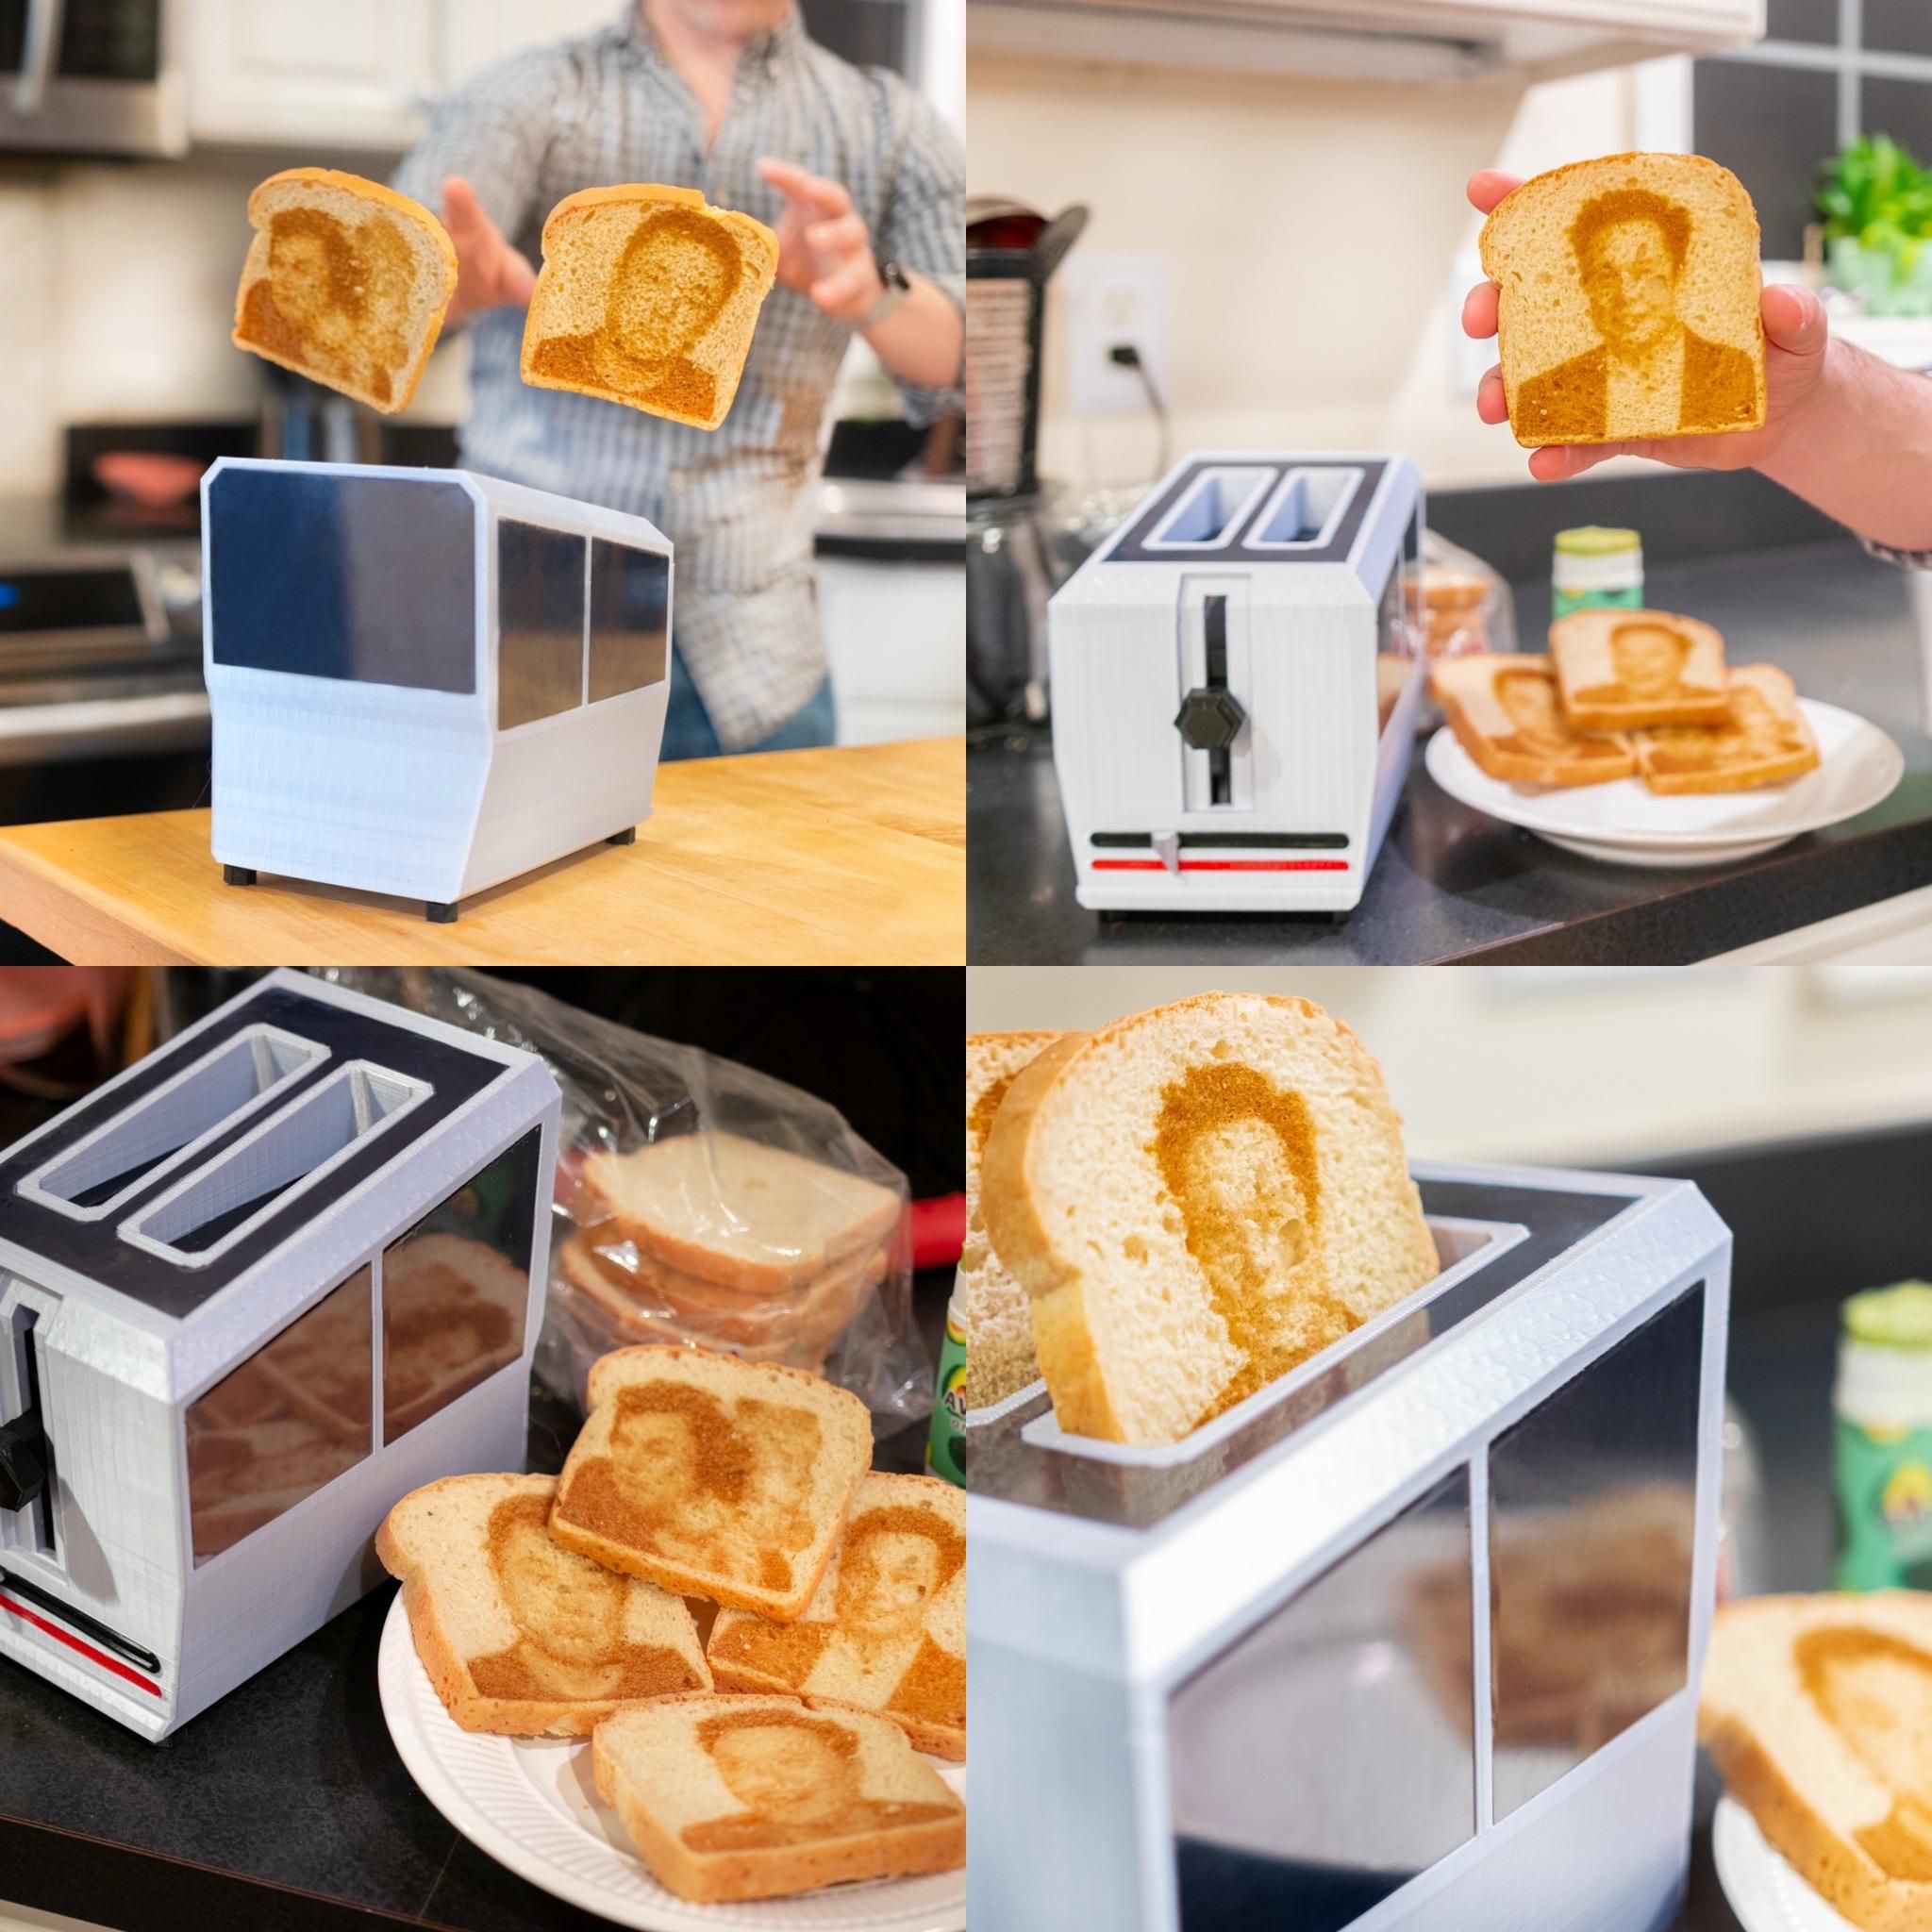 I like to develop fake product ideas, so I created the CyberToaster. The Tesla inspired toaster that makes Elon Toast.